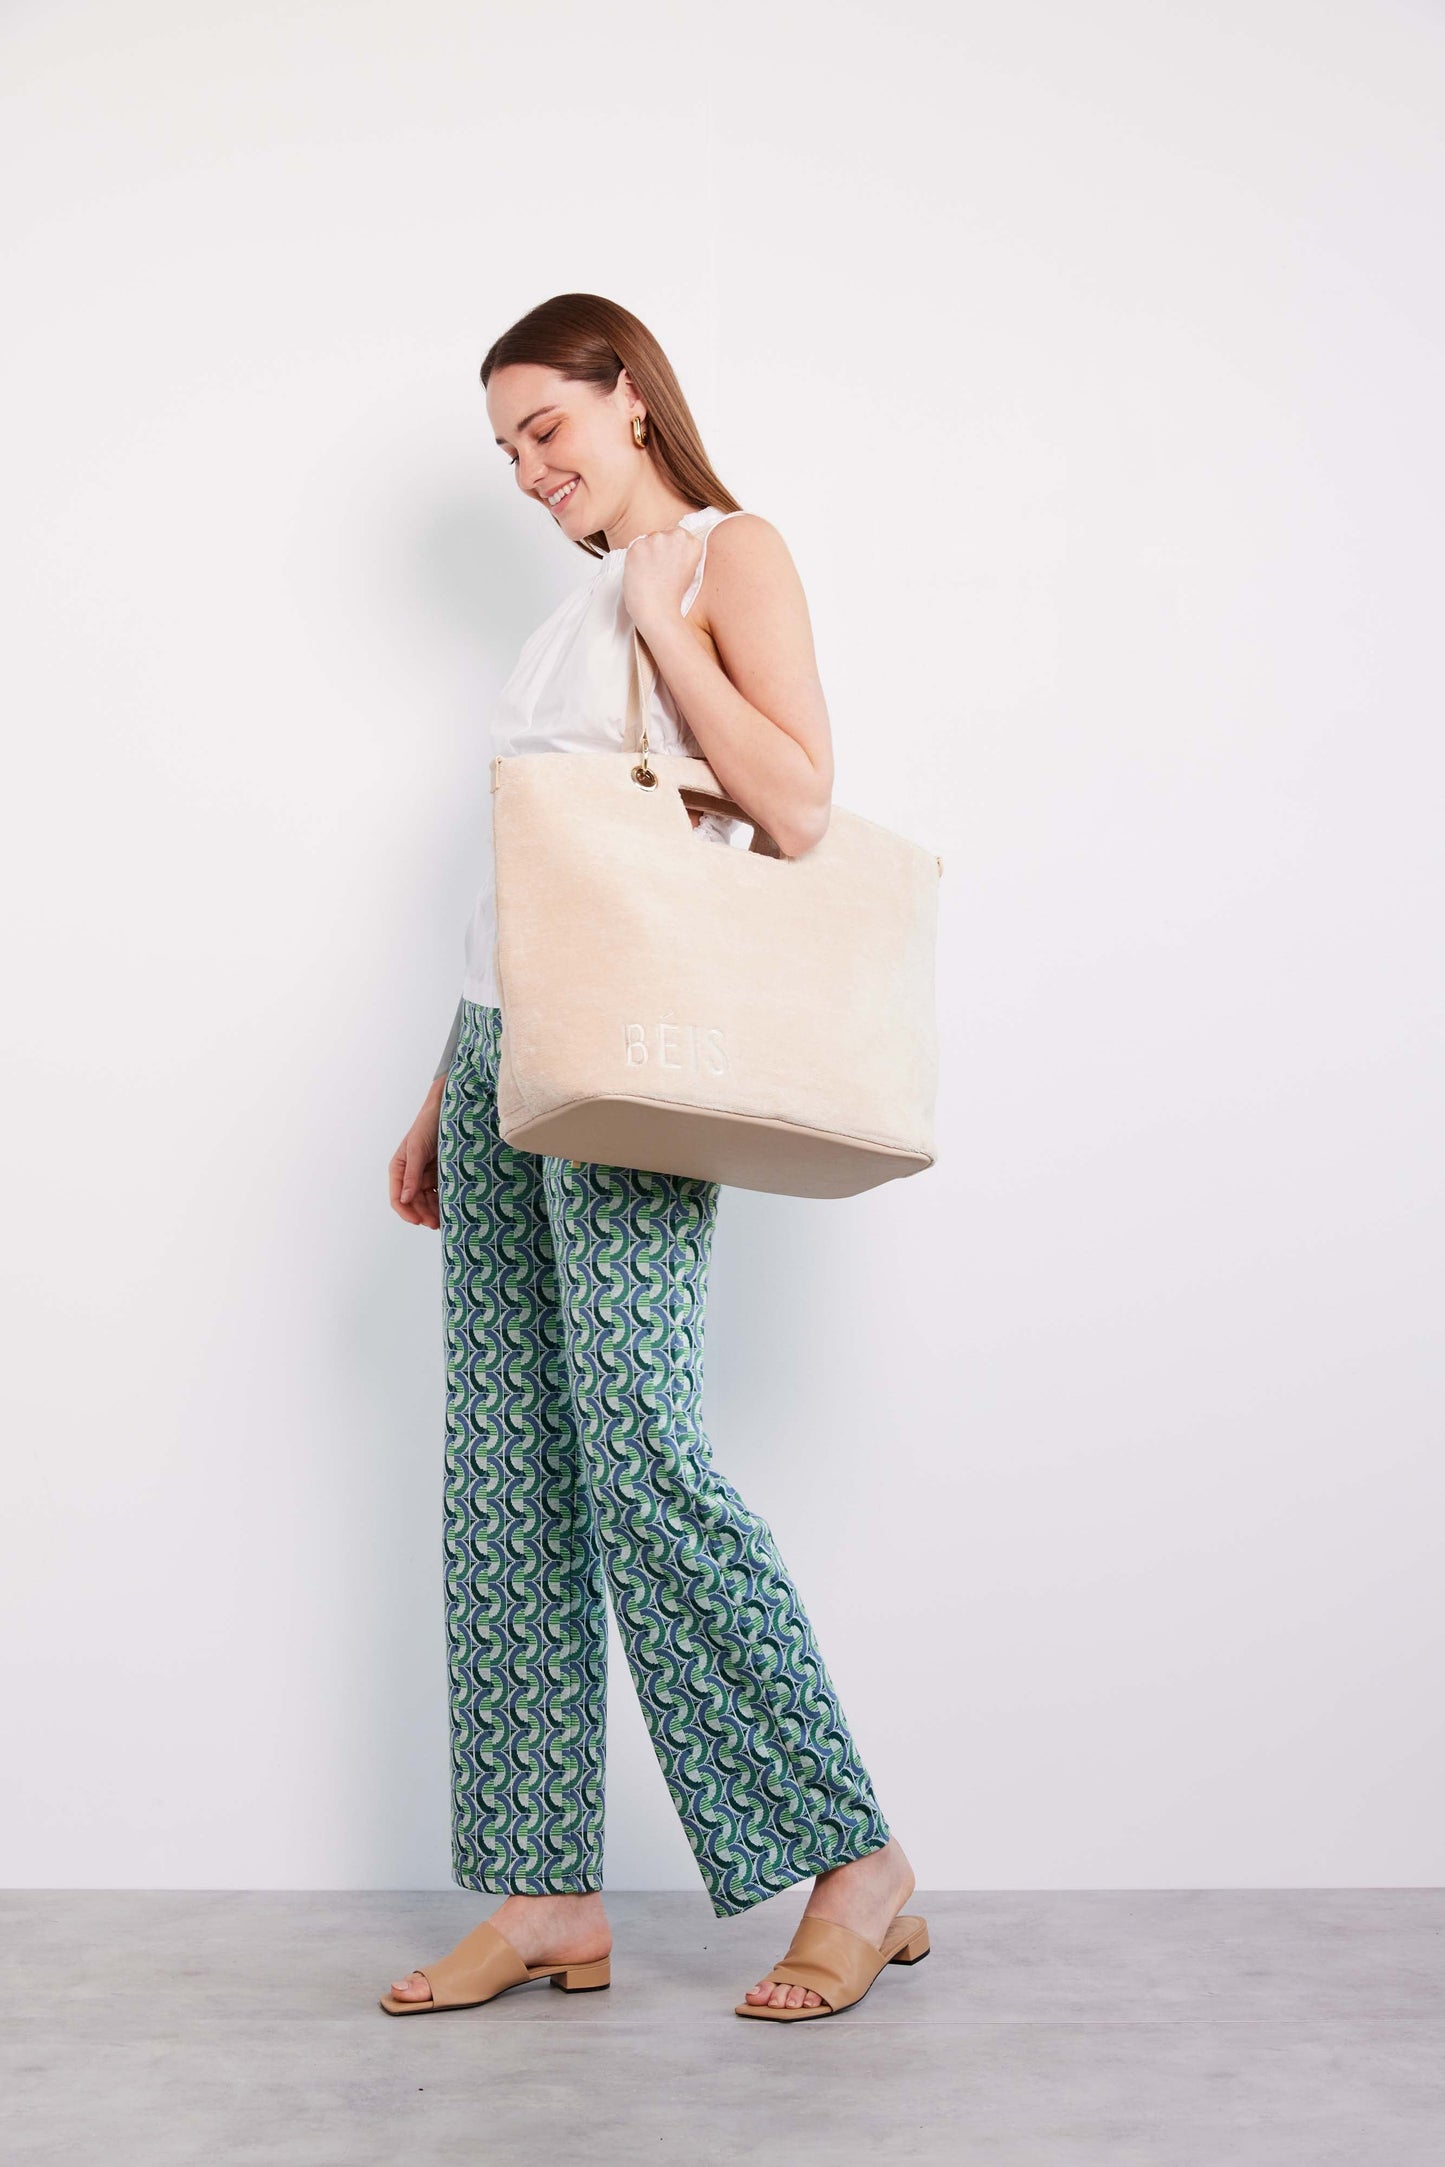 The Terry Tote in Beige